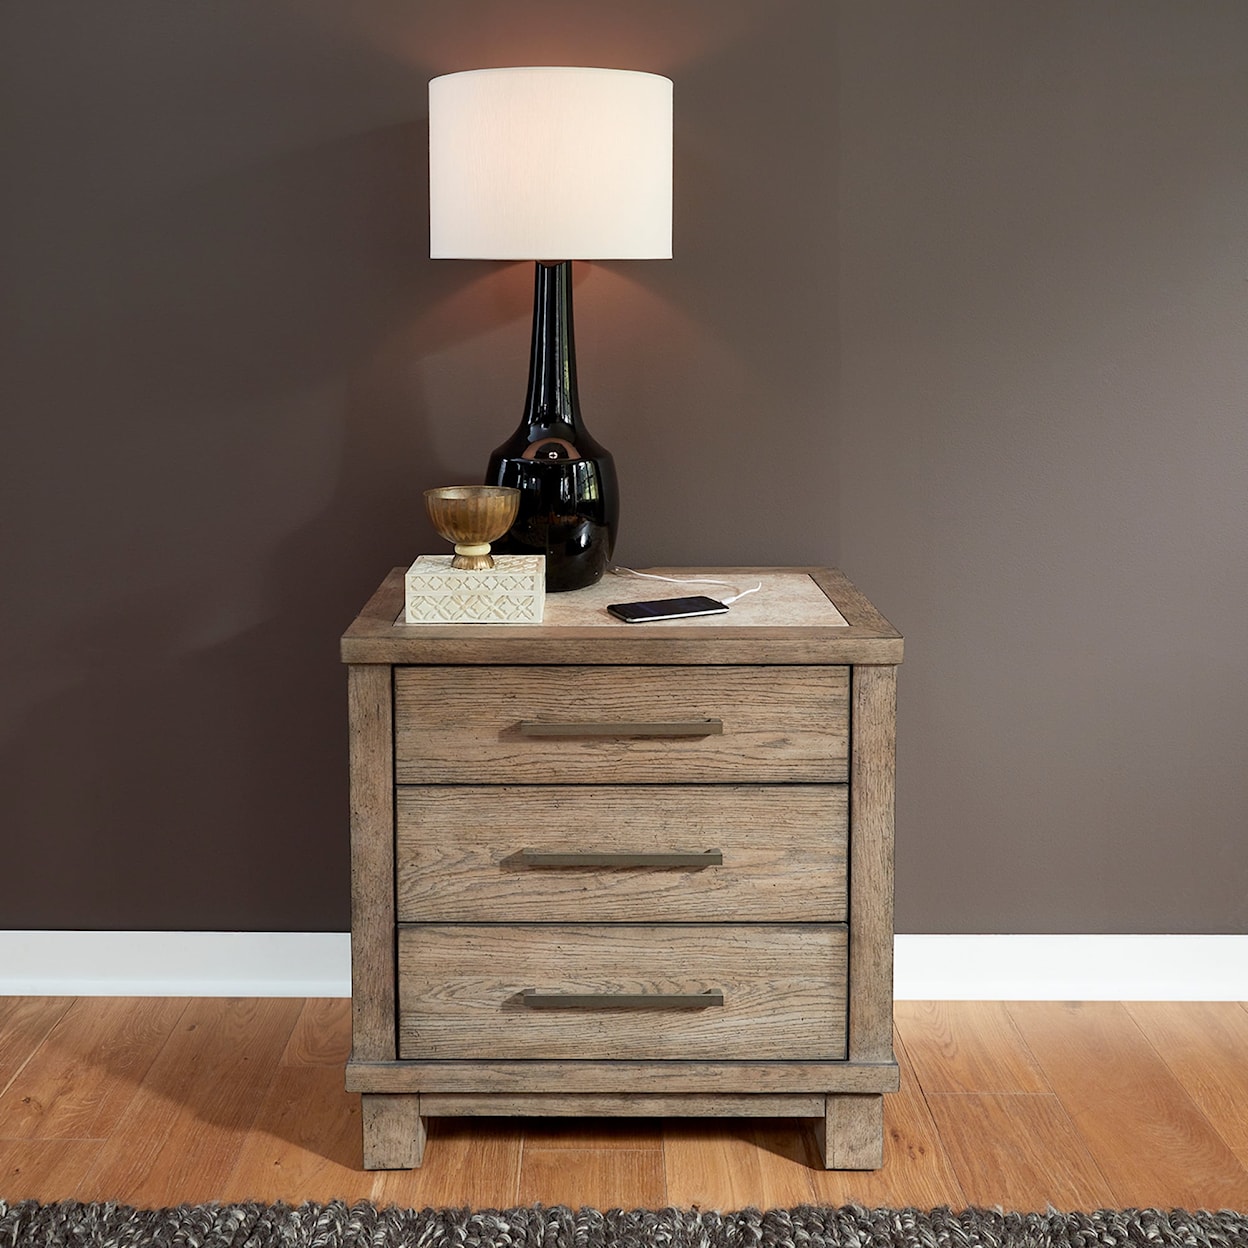 Libby Canyon Road 3-Drawer Night Stand